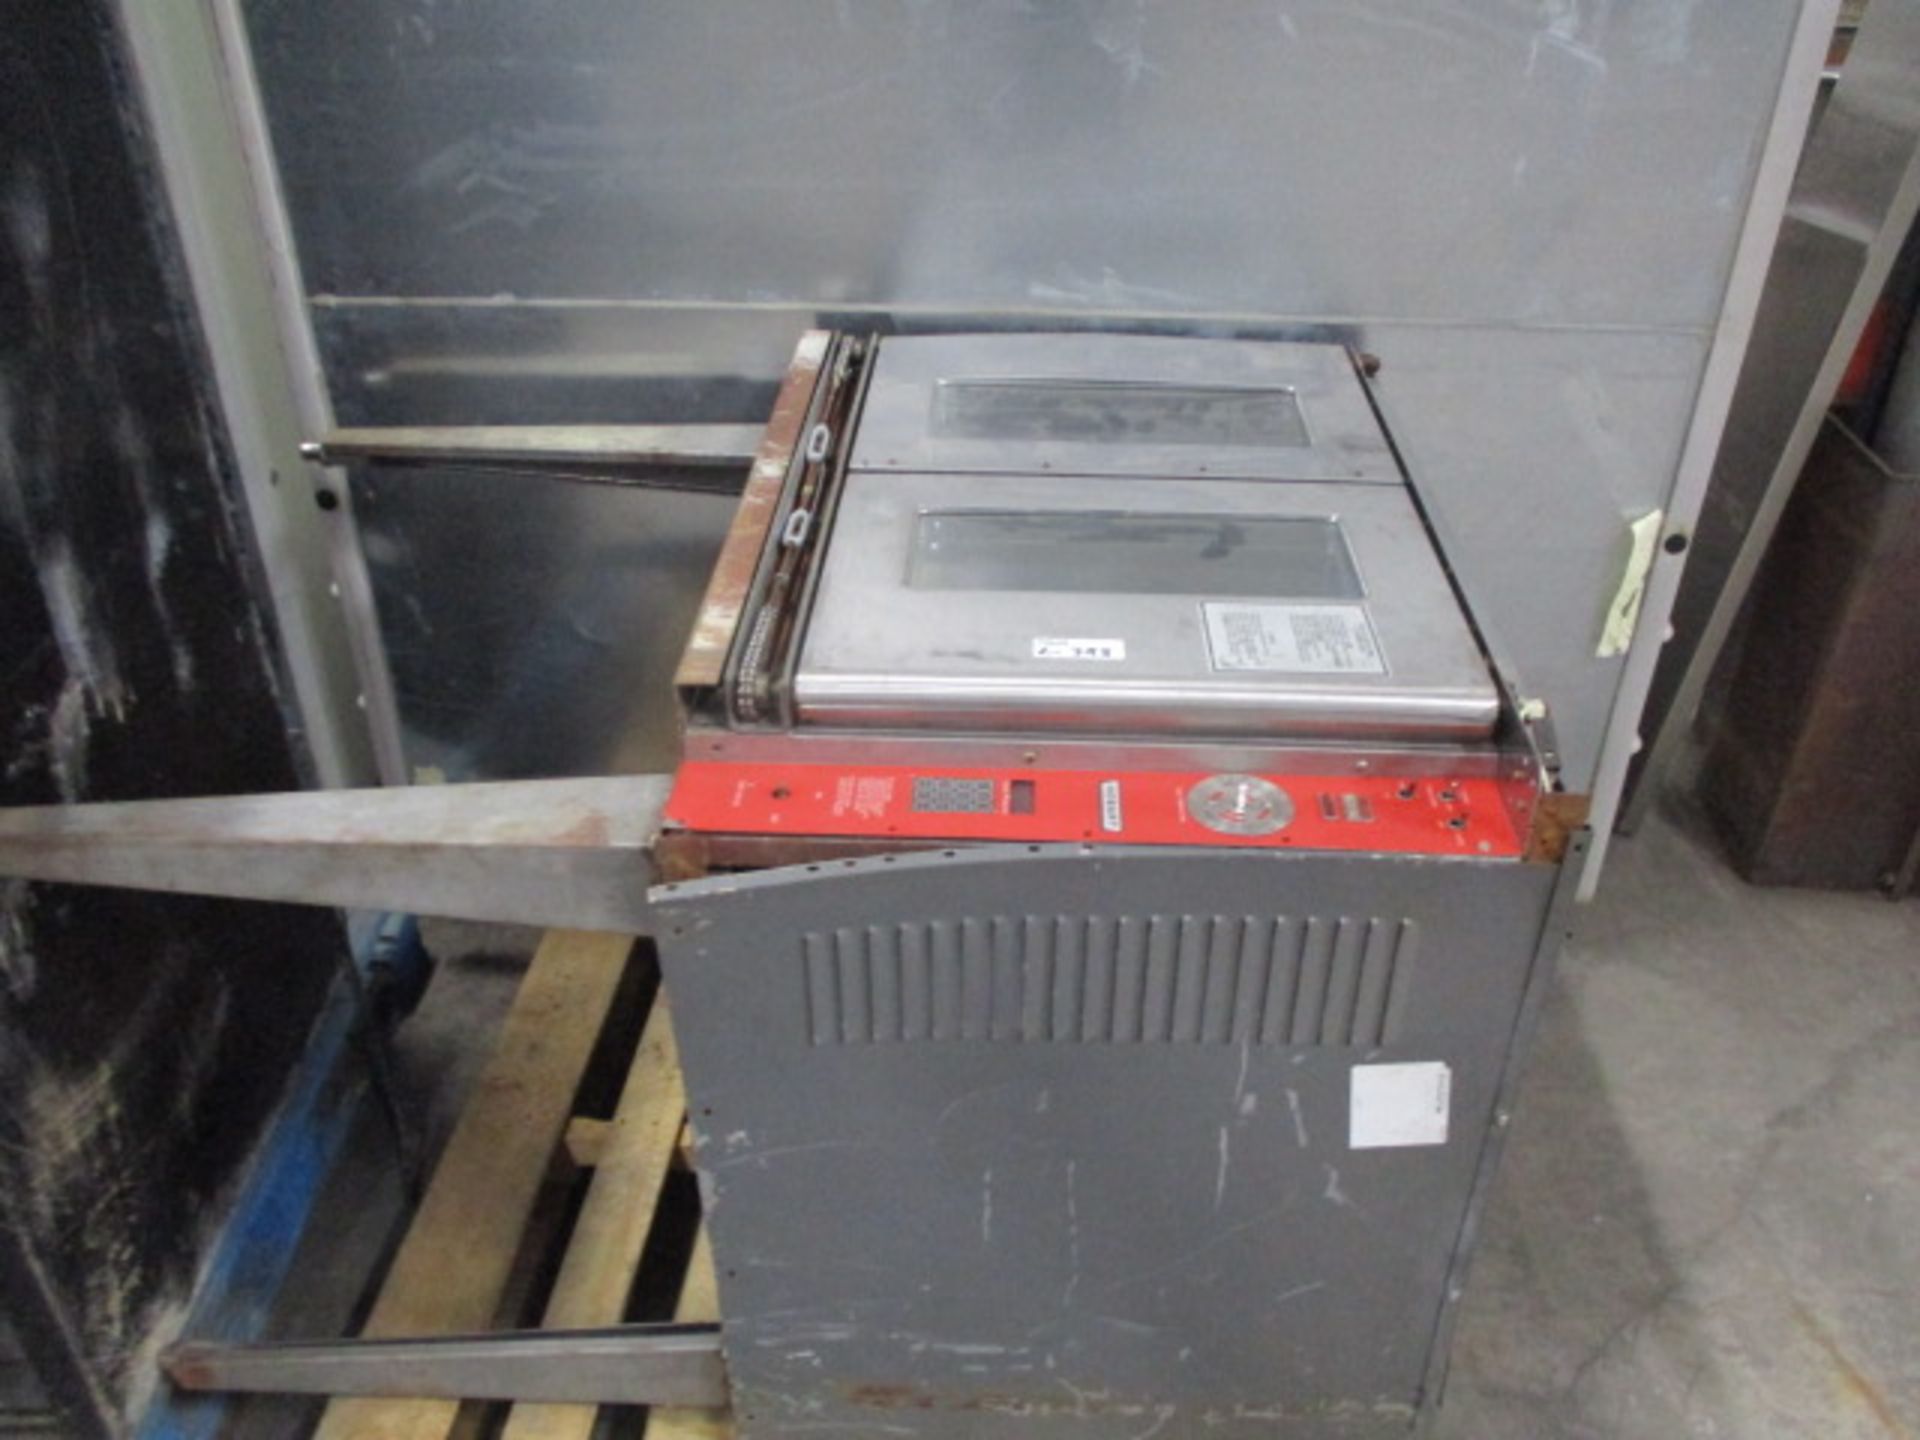 hobart full size convection oven and fryer (both pieces are missing parts )